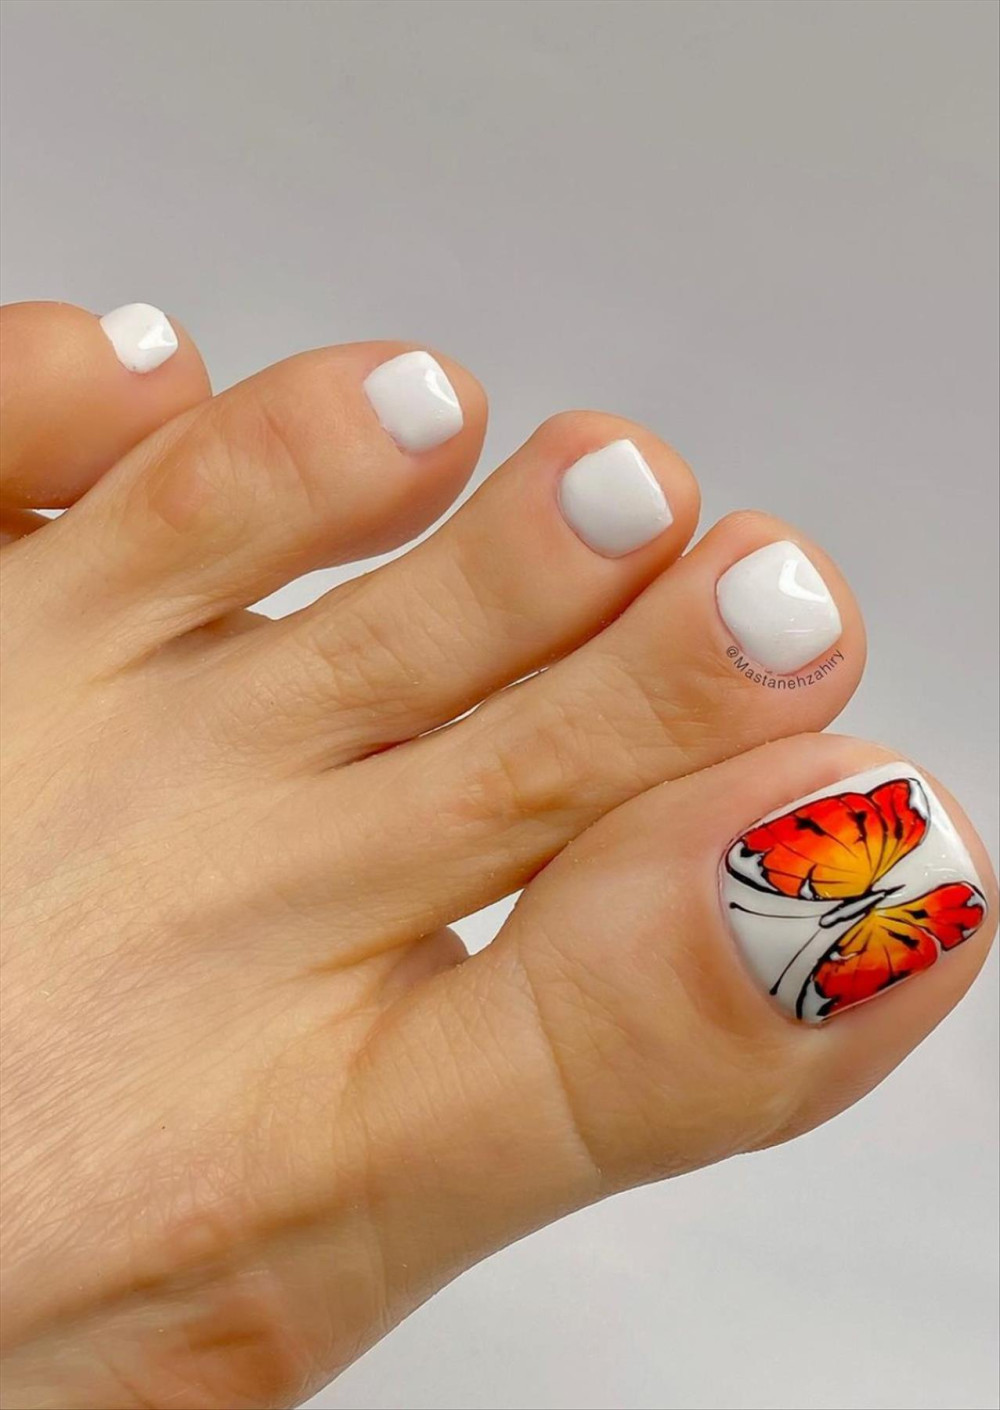 30 Cute Toe Nail Designs To Make Your Feet Adorable - T-News